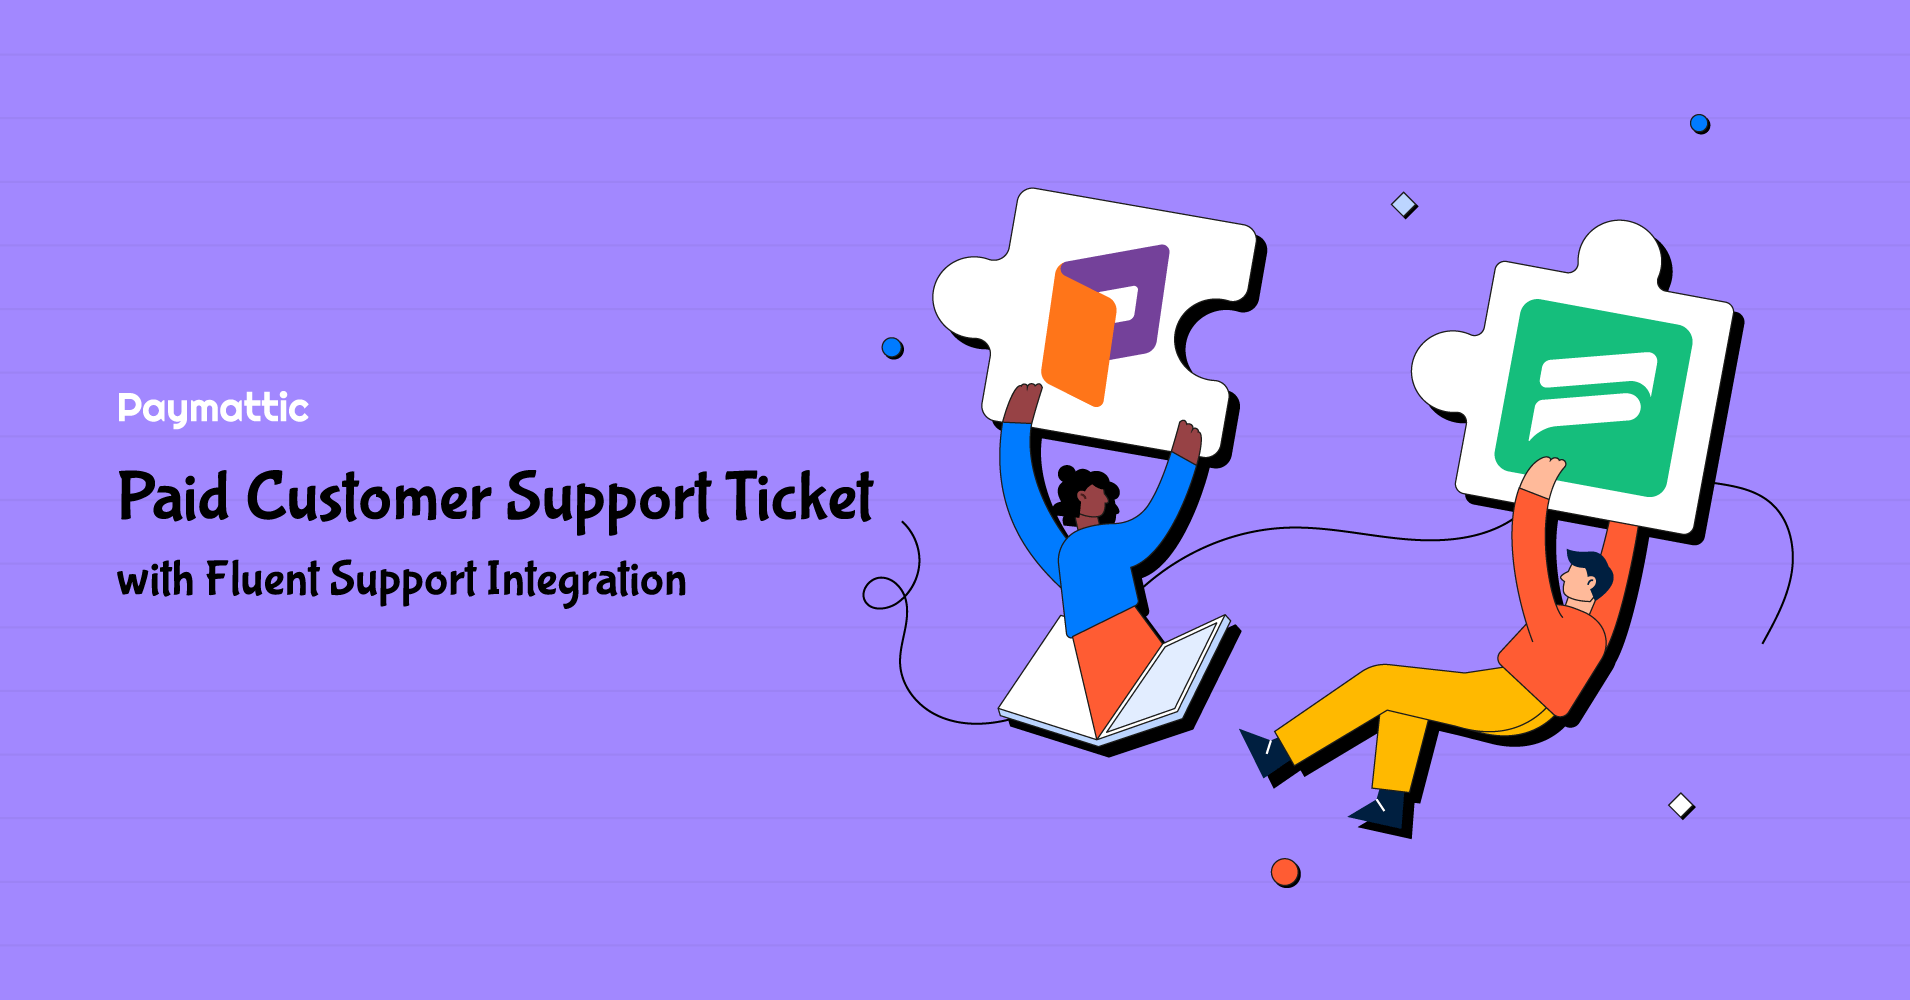 Enable Paid Customer Support Ticket with Fluent Support Integration in WordPress